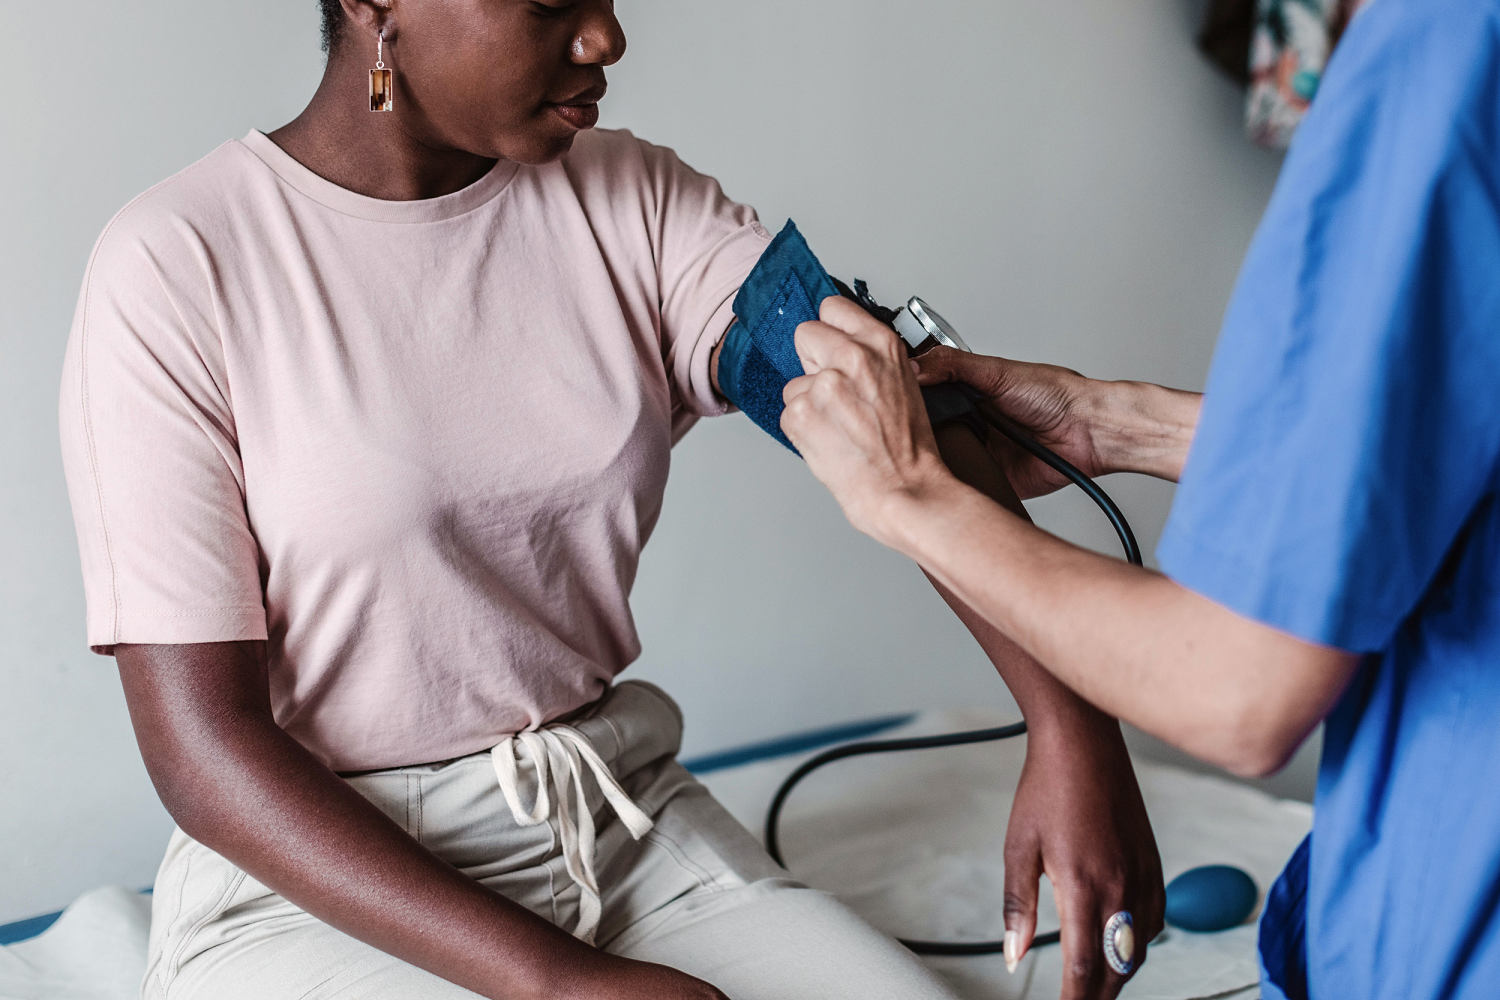 Black women under 35 with high blood pressure may have triple the risk of stroke, study says 